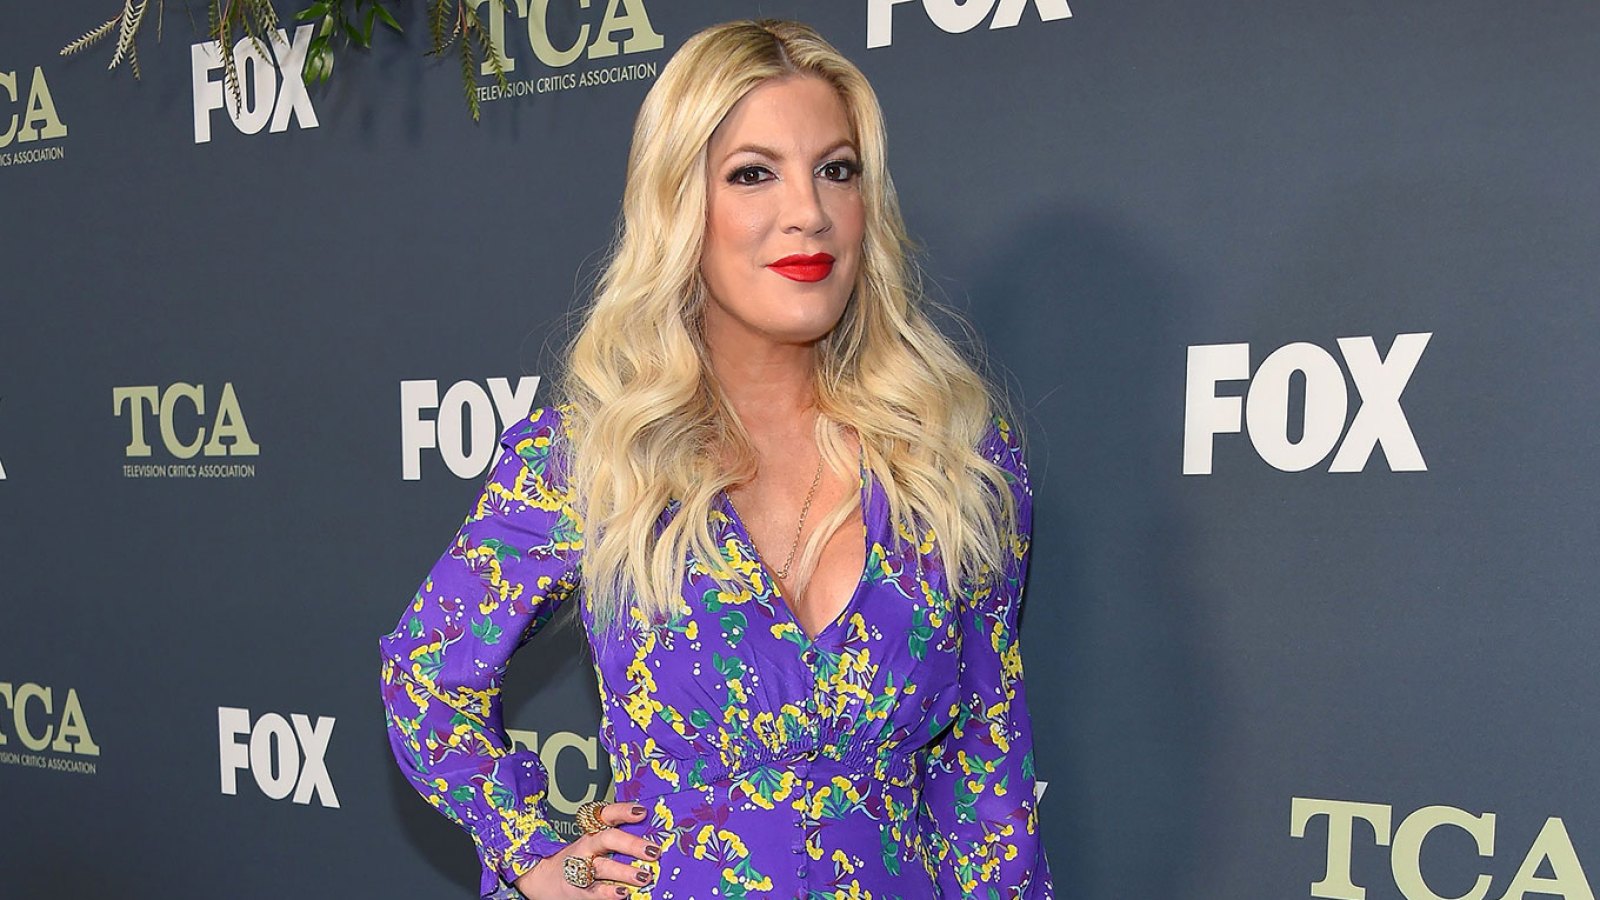 Tori-Spelling-on-the-90210-Revival-Its-Like-Family-Coming-Back-Together